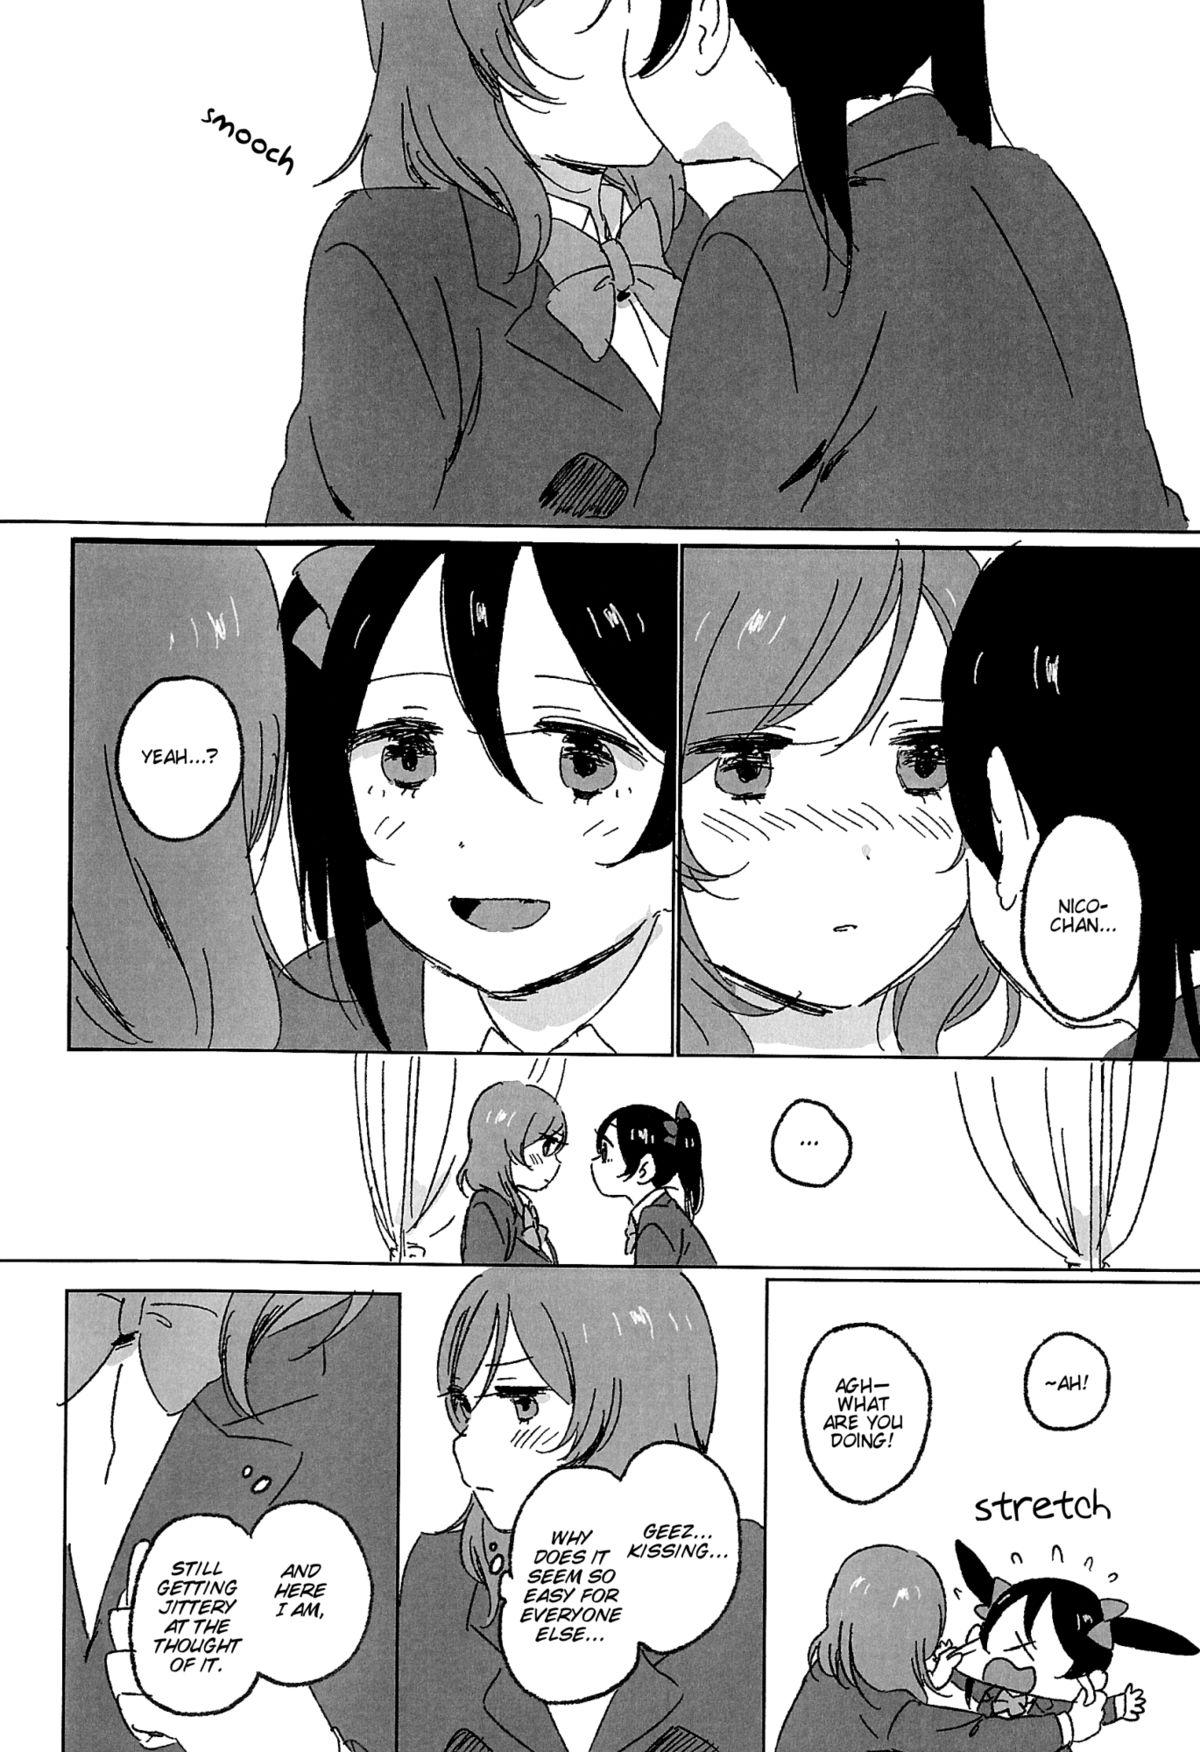 Cock Suck Kocchi Mite Honey | Look Here, Honey - Love live Shemales - Page 4